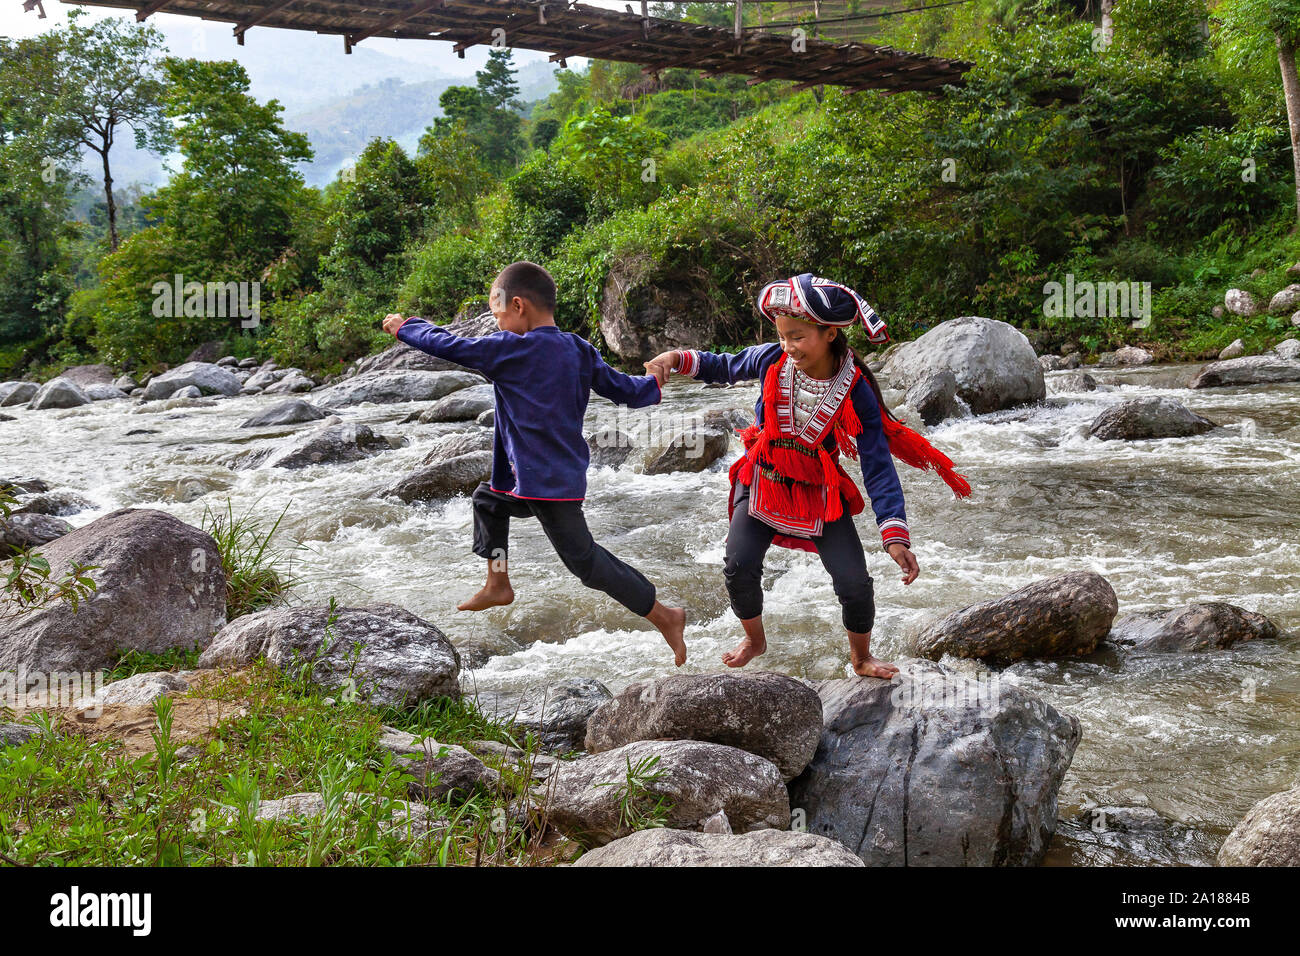 Red Dao ethnic minority boy and girl (Dao Do), playing by a river in Hoang Su Phi, Ha Giang province, in the mountainous northwestern part of Vietnam. Stock Photo